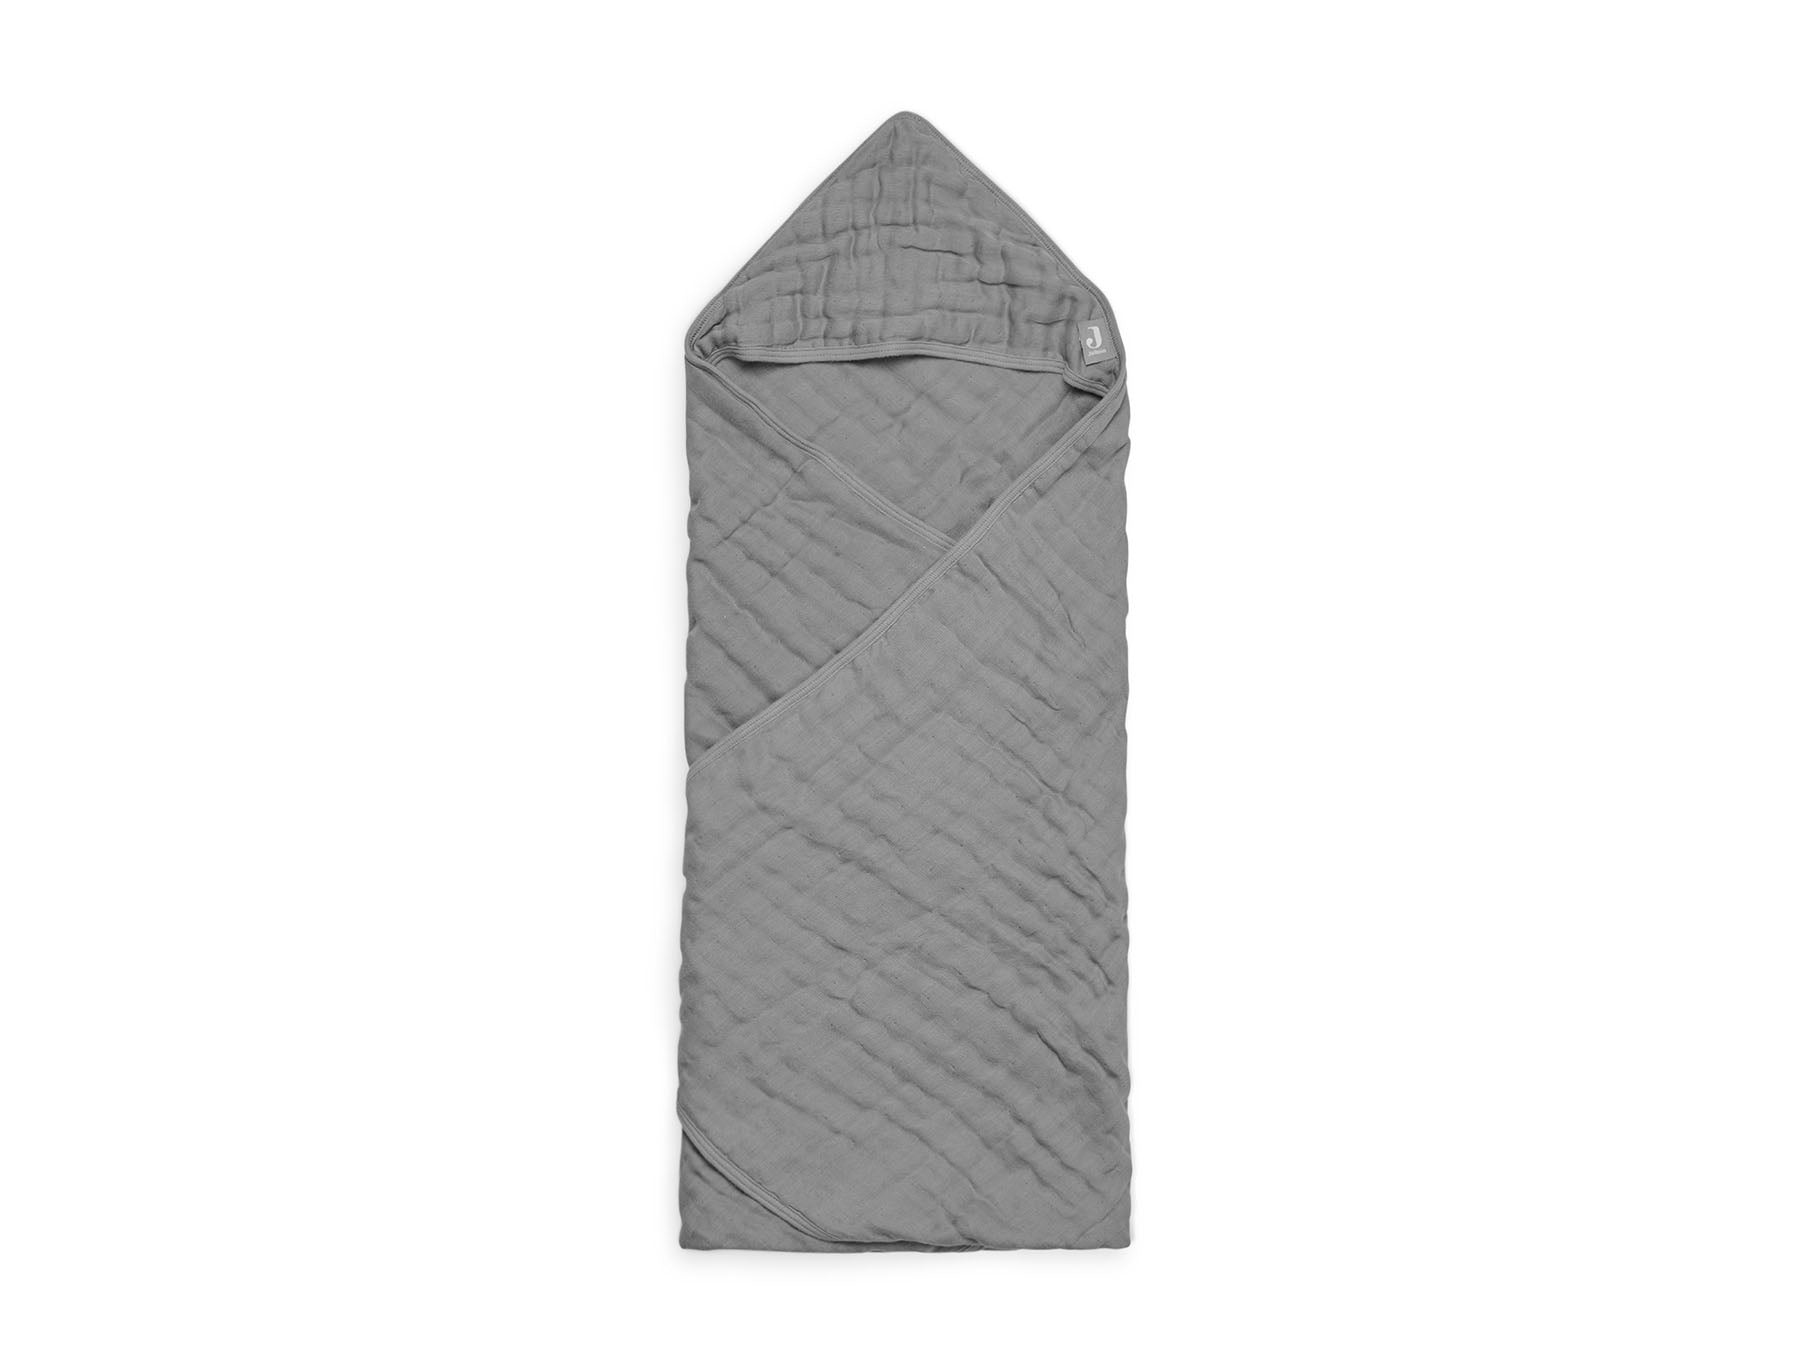 jollein bath cape wrinkled cotton storm gray hooded towel